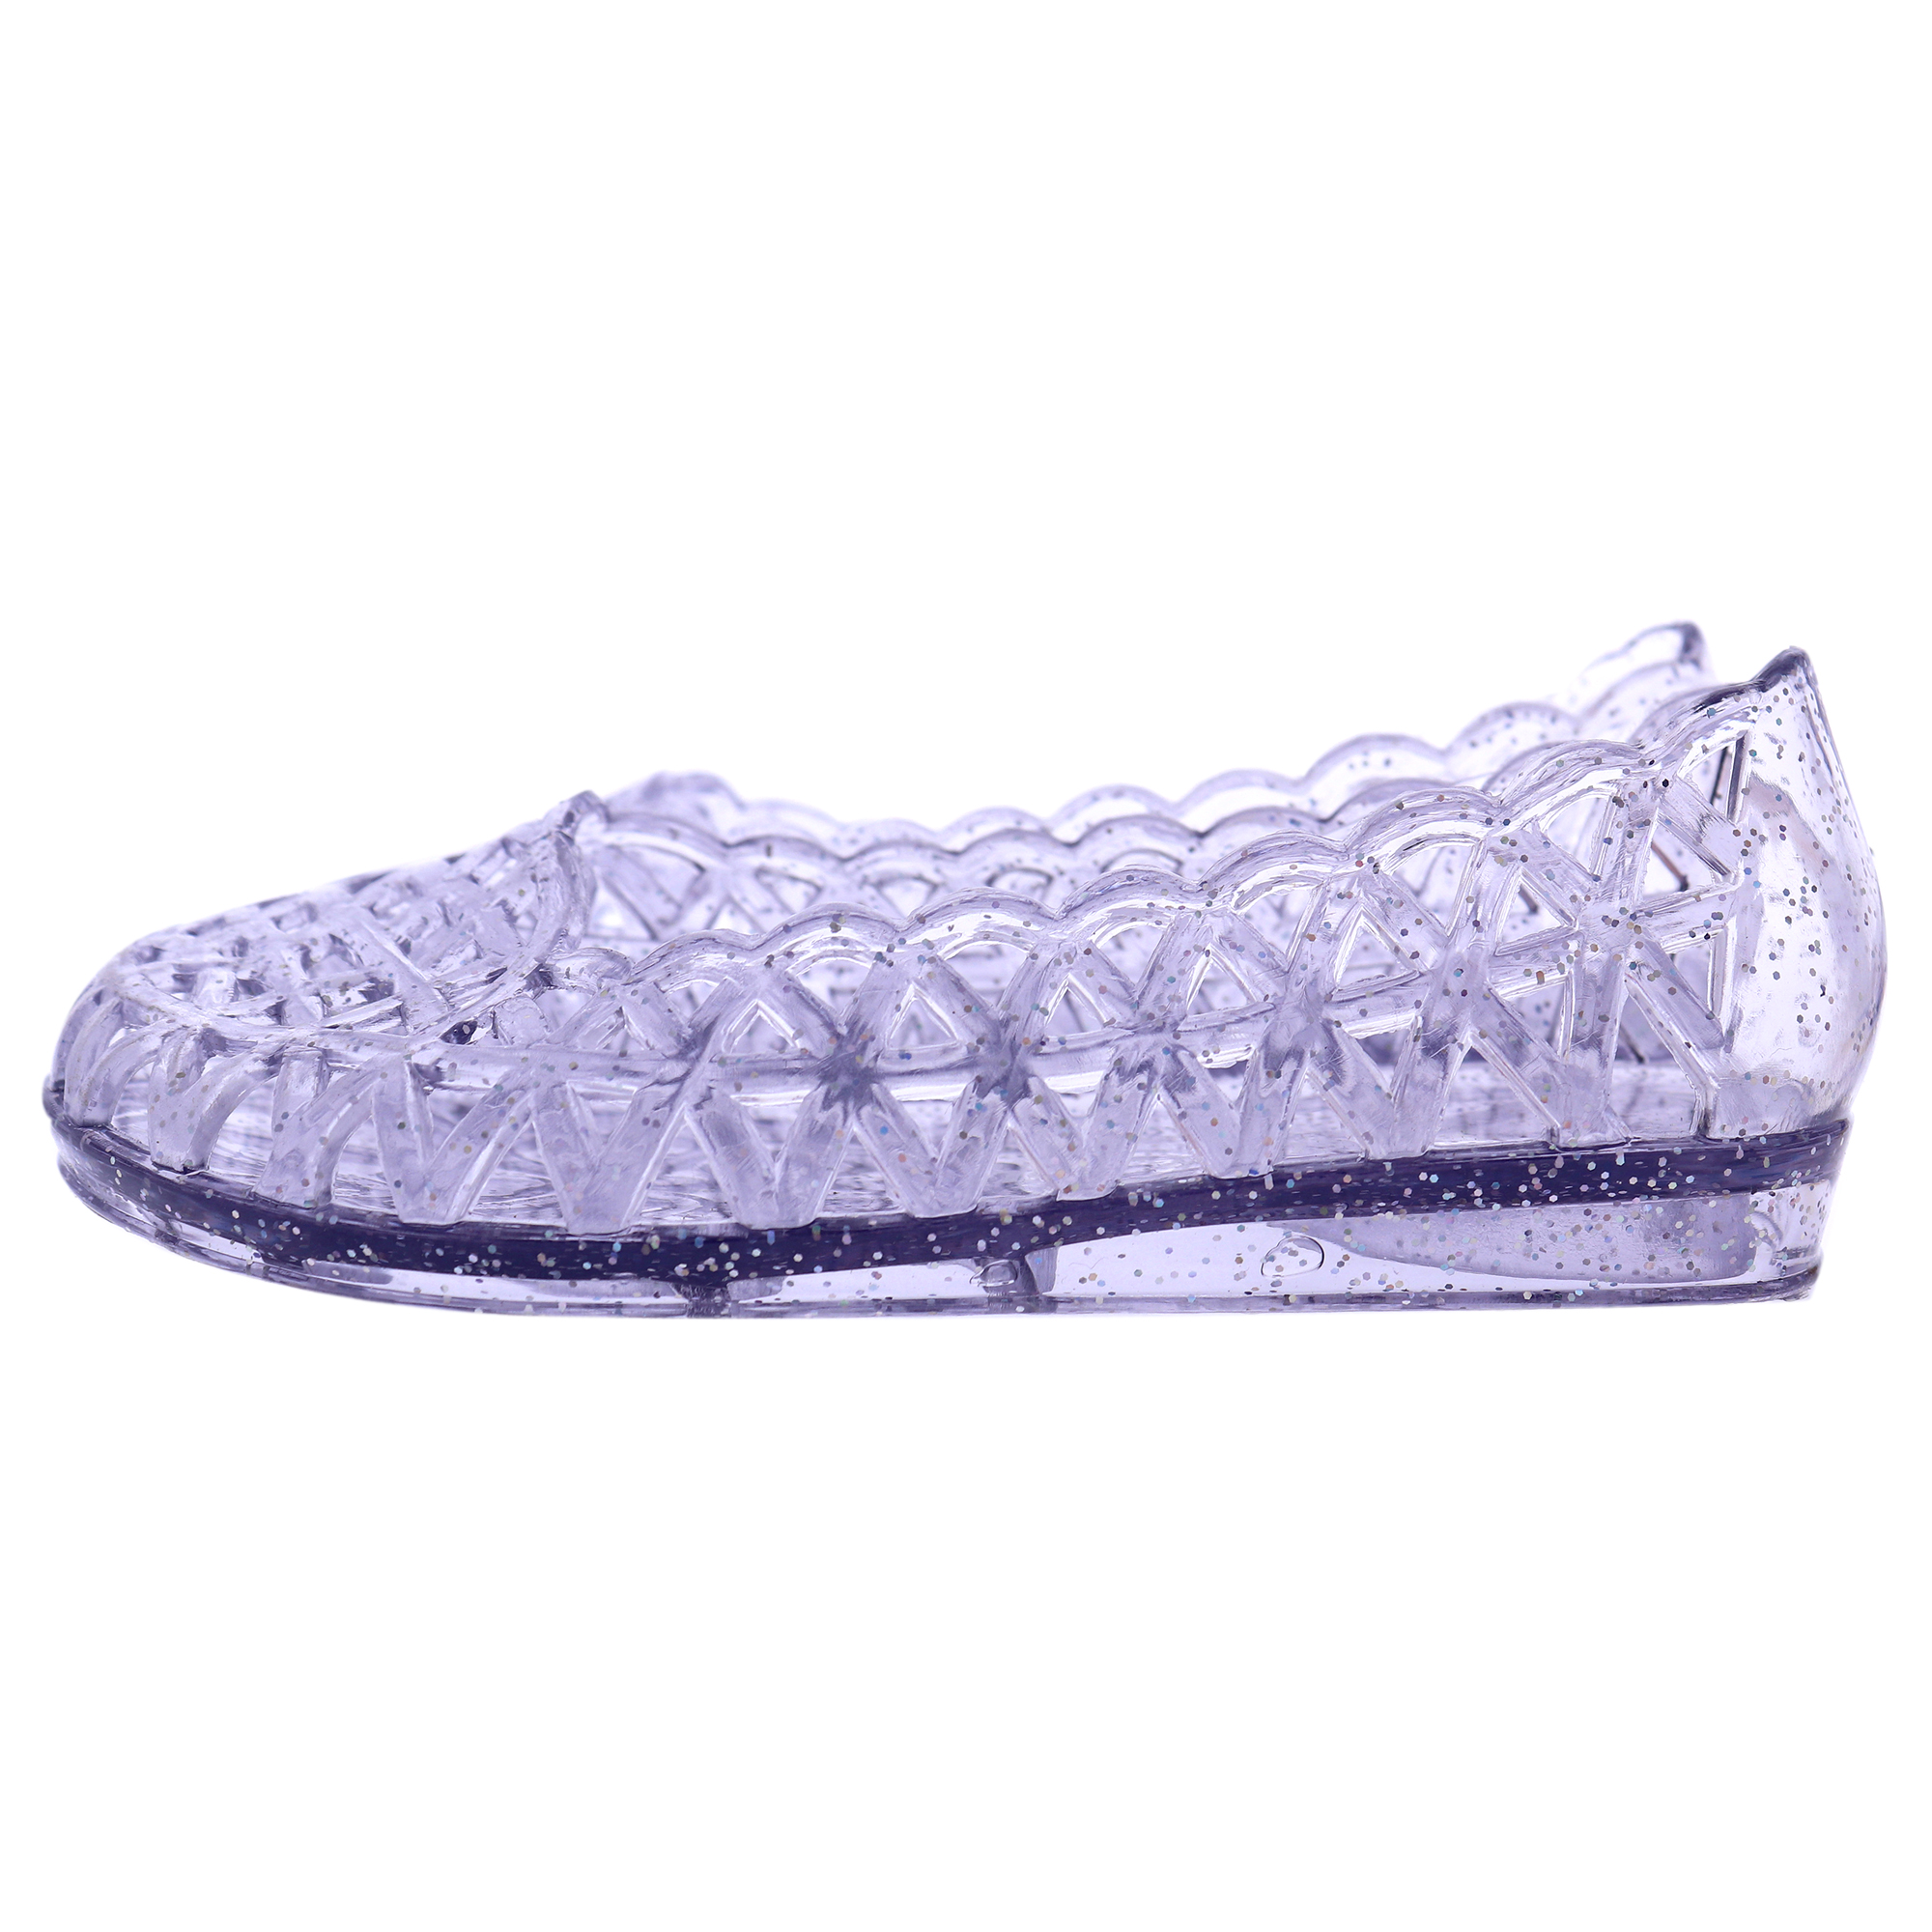 Heart Sole Girl Jellies Shoes - 6 Purple by DelSol for Kids - 1 Pair Shoes - image 2 of 6